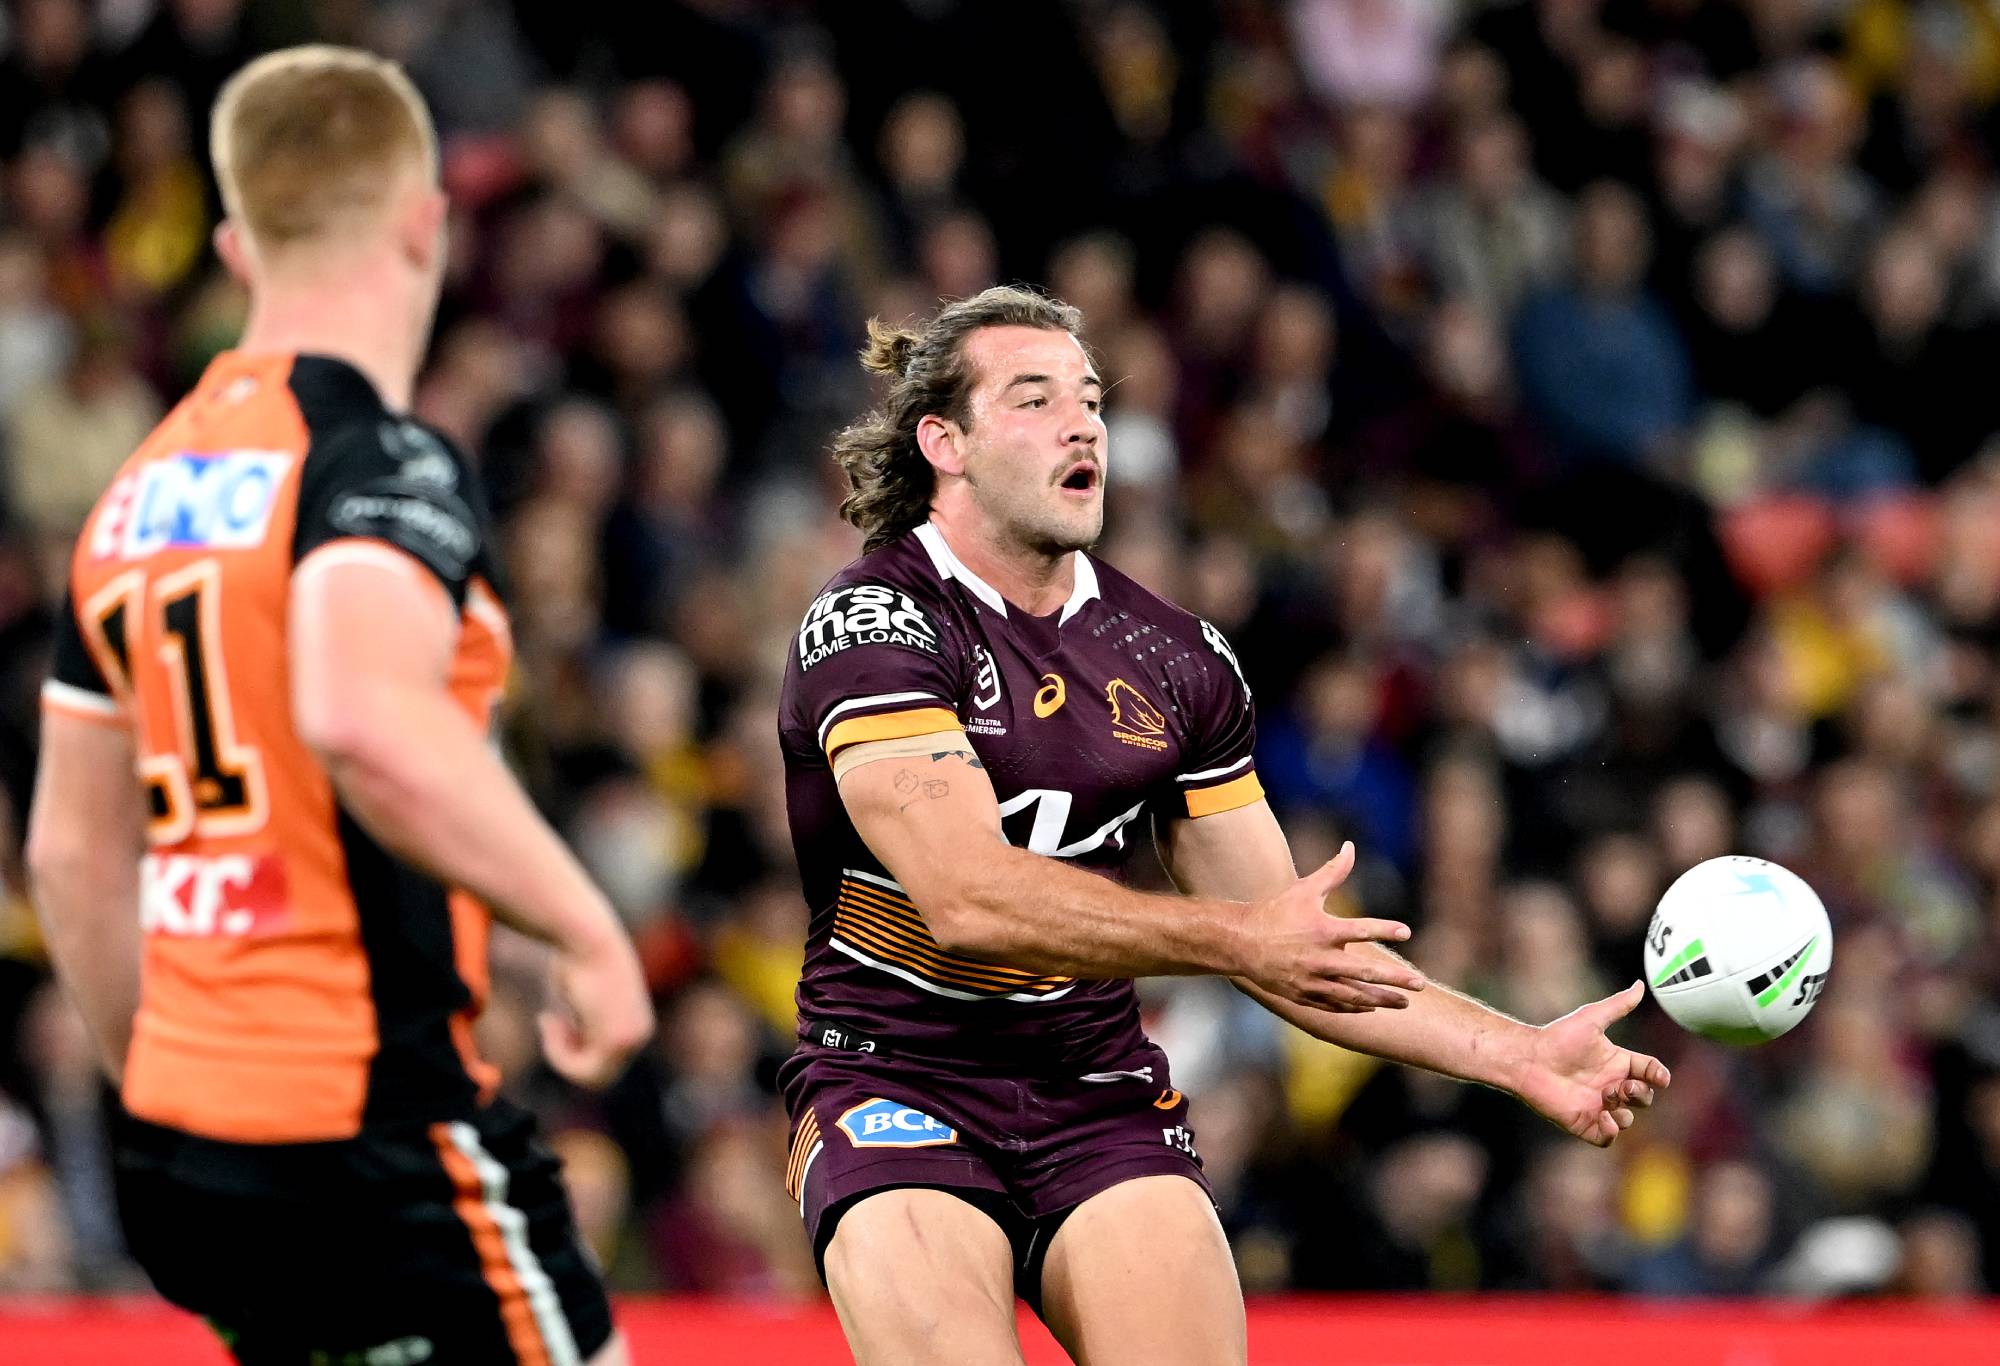 BRISBANE, AUSTRALIA - JULY 30: Patrick Carrigan of the Broncos passes the ball during the round 20 NRL match between the Brisbane Broncos and the Wests Tigers at Suncorp Stadium, on July 30, 2022, in Brisbane, Australia. (Photo by Bradley Kanaris/Getty Images)